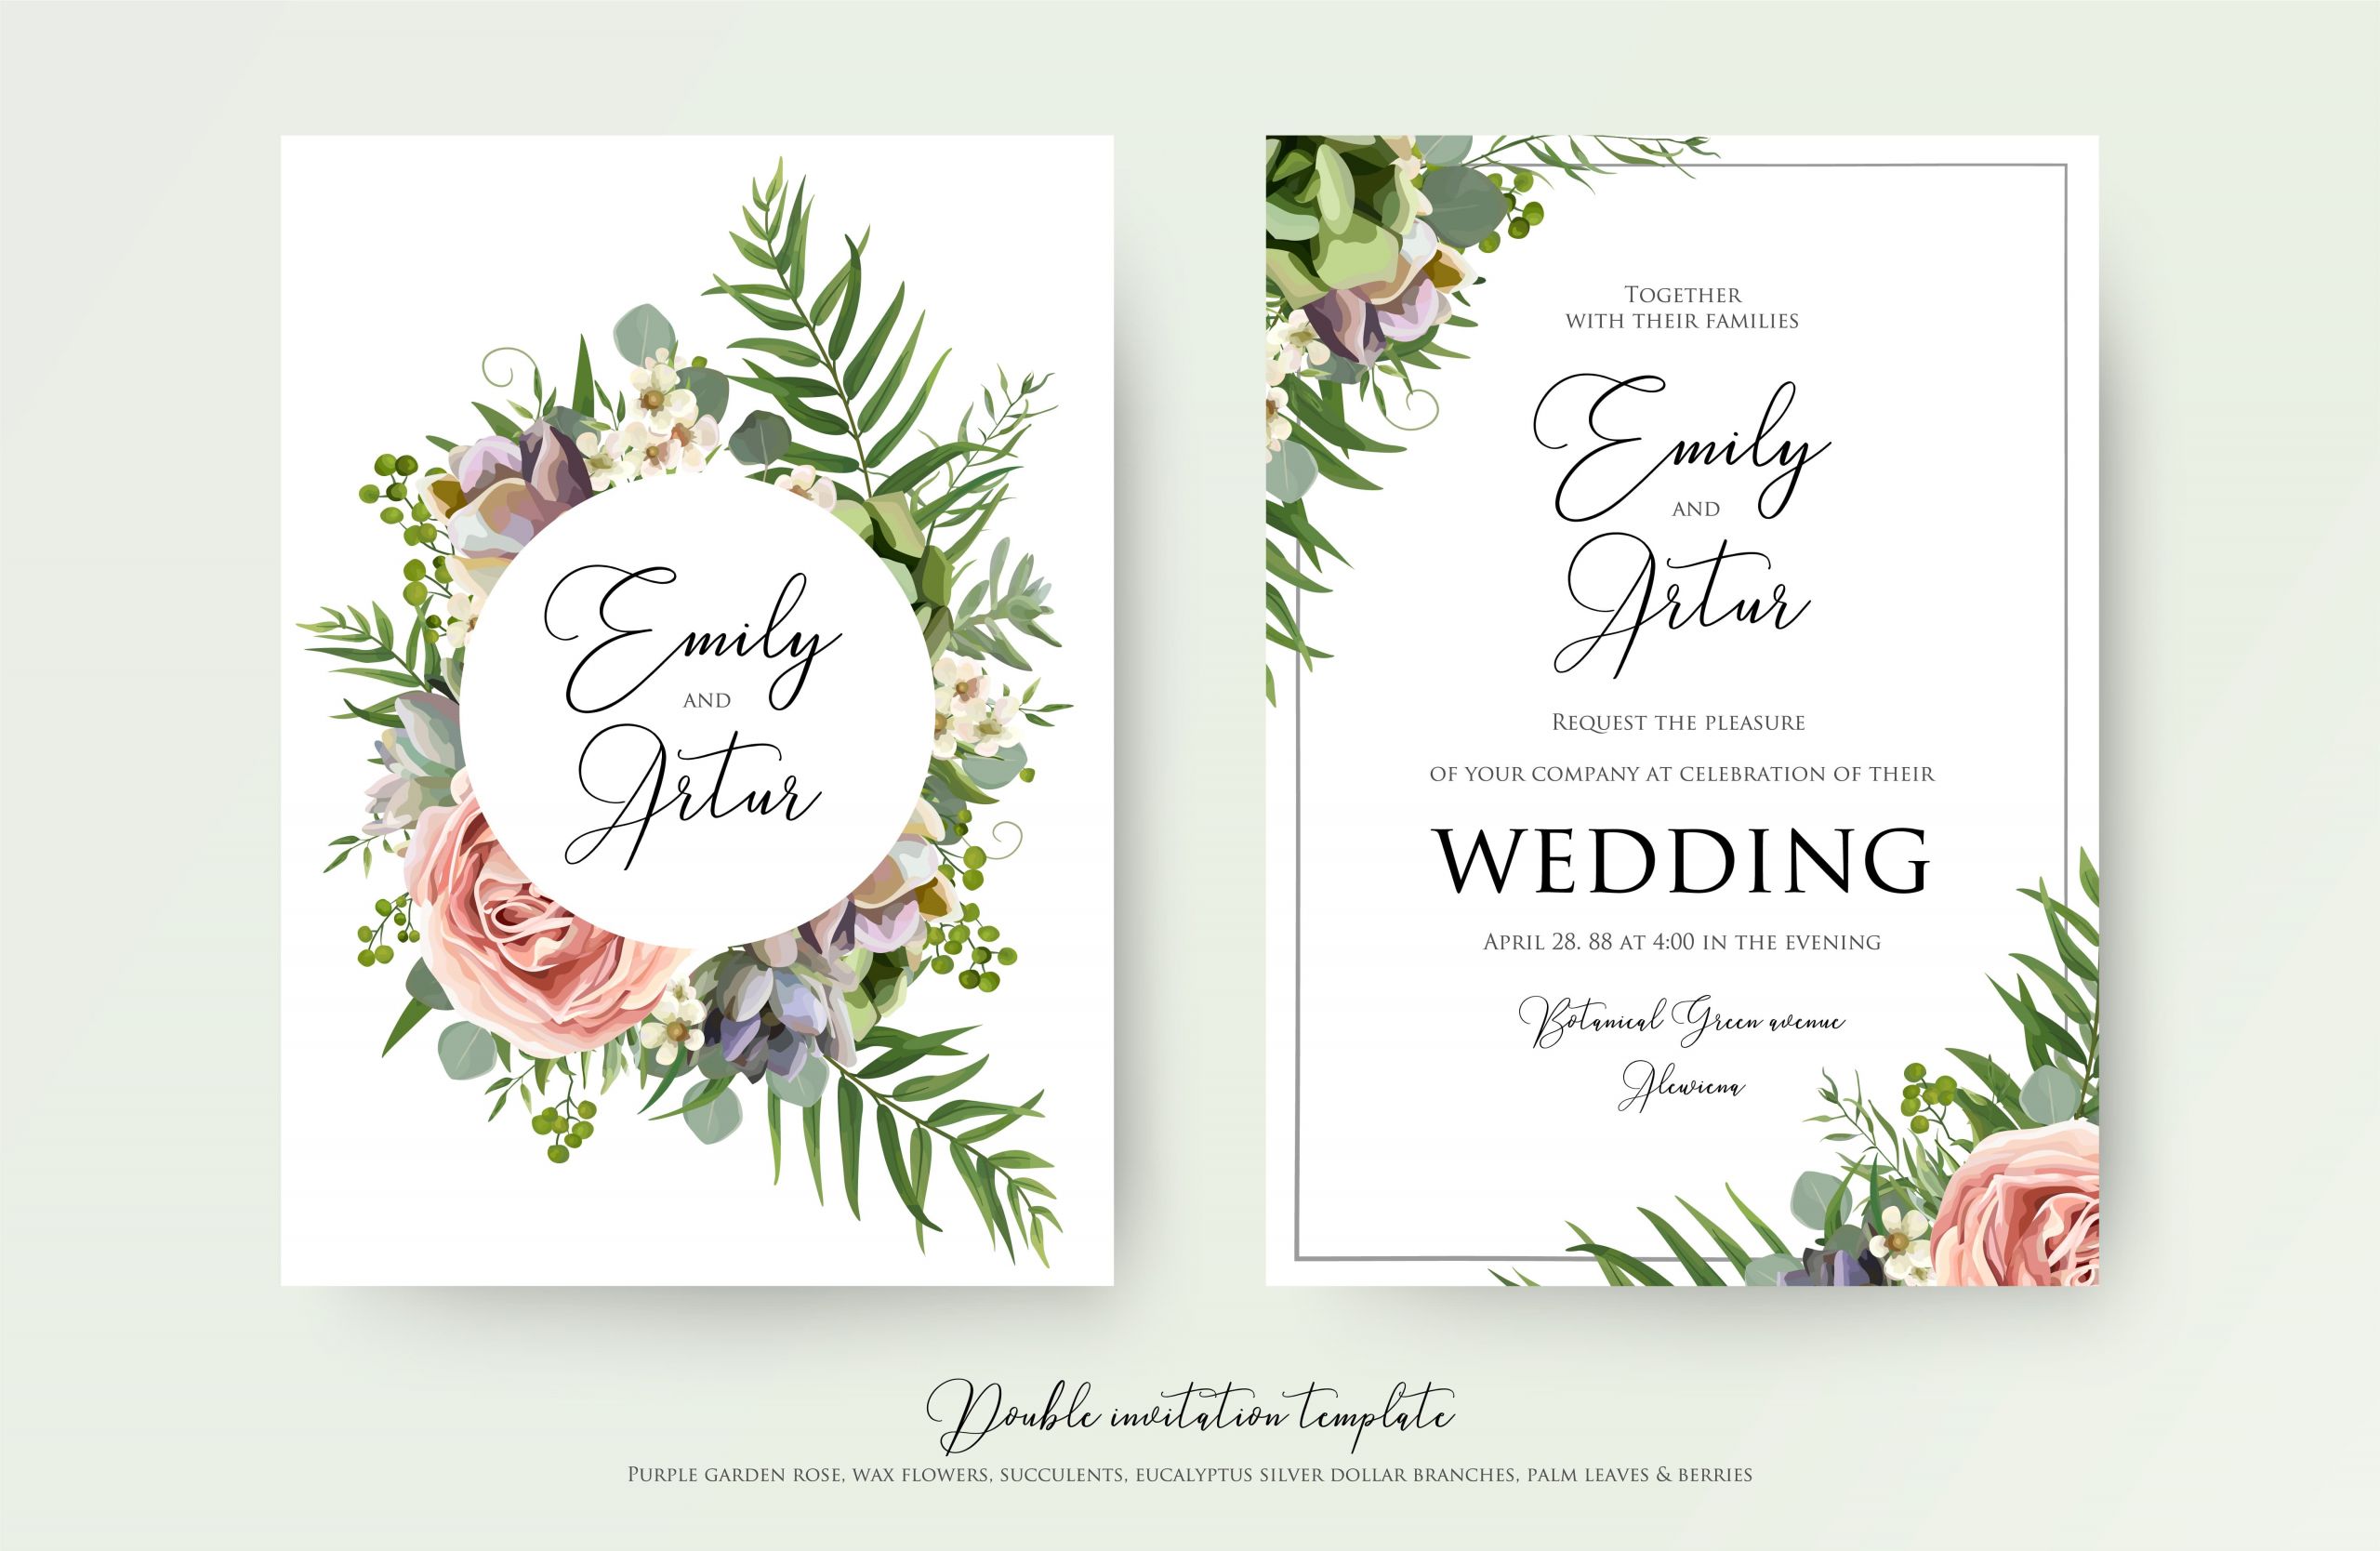 One Of A Kind Wedding Invitations
 What Should Be the Turnaround Time for Printing Wedding